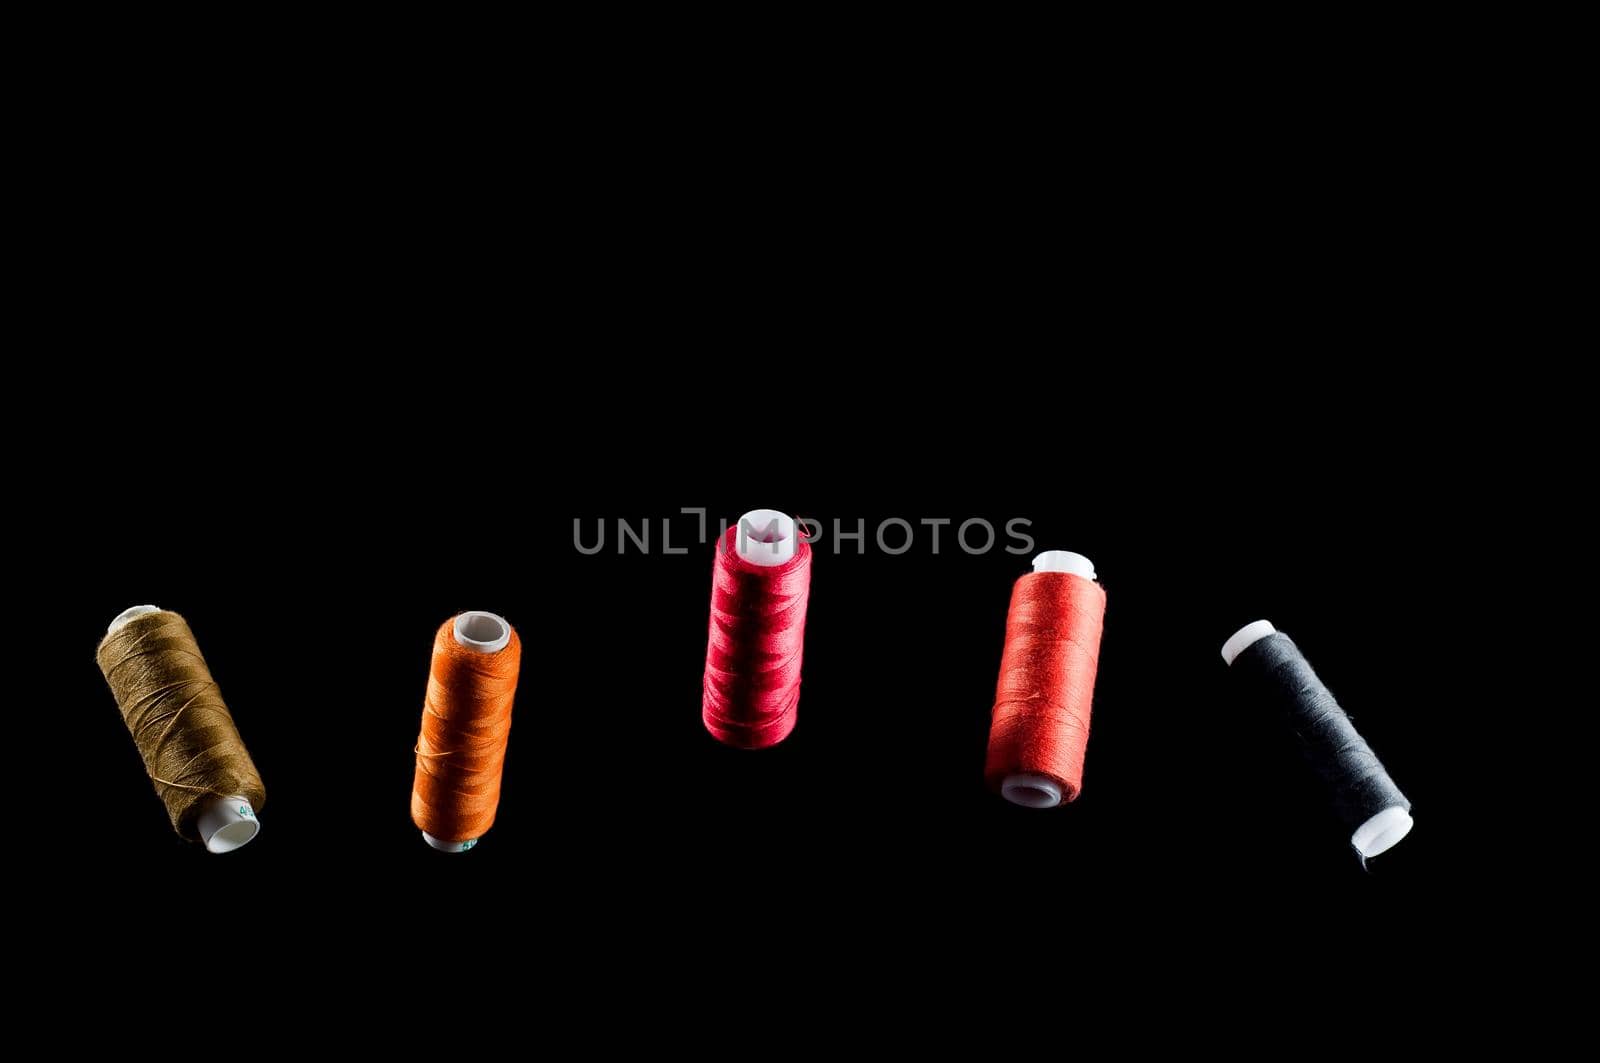 Black, bronze, orange, red and pink threads floating in the air against a black background, isolate